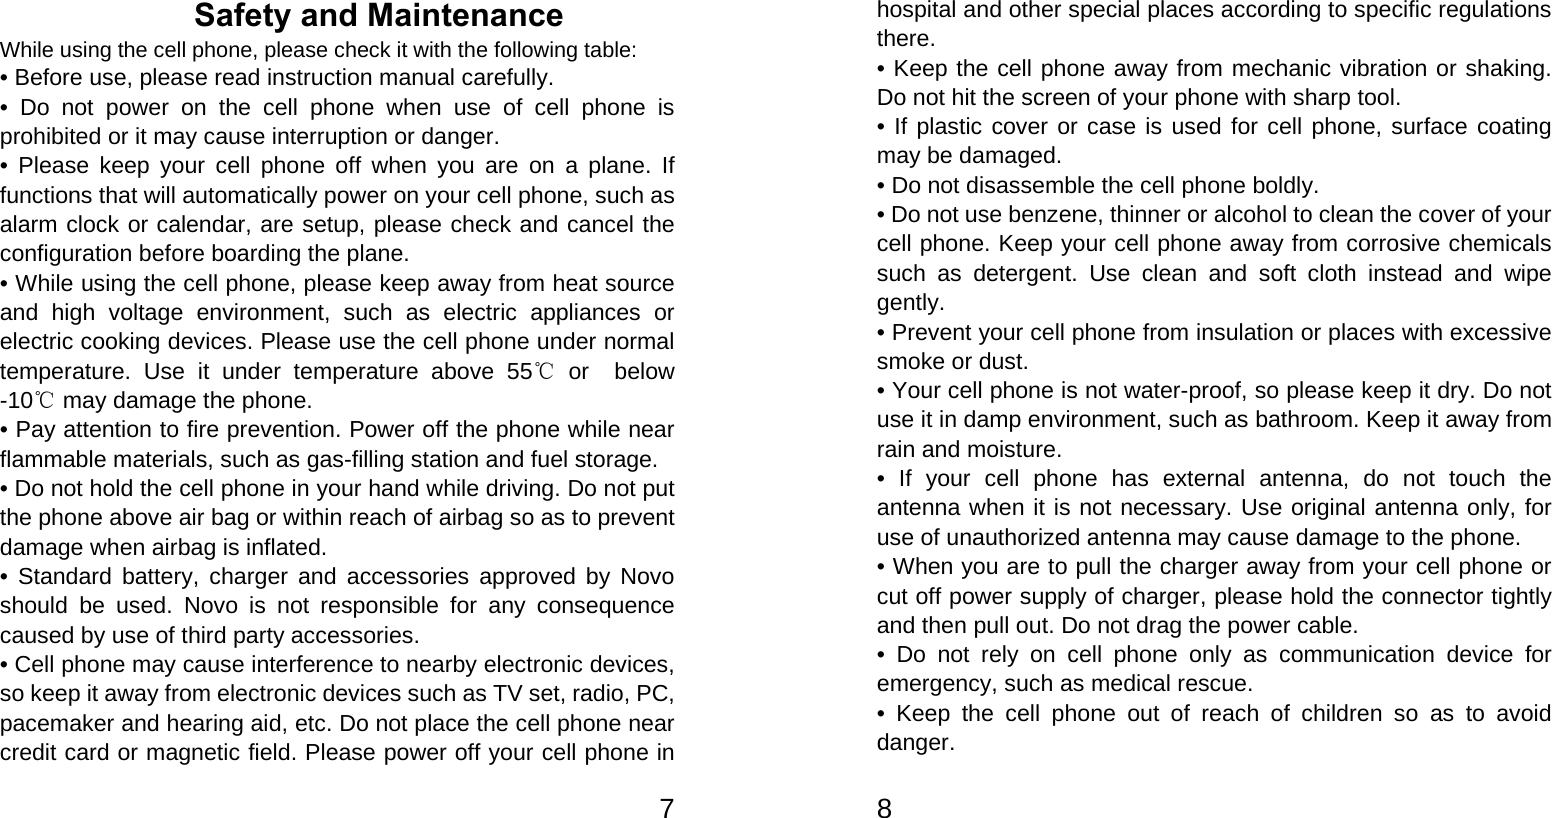   7Safety and Maintenance While using the cell phone, please check it with the following table: • Before use, please read instruction manual carefully. • Do not power on the cell phone when use of cell phone is prohibited or it may cause interruption or danger. • Please keep your cell phone off when you are on a plane. If functions that will automatically power on your cell phone, such as alarm clock or calendar, are setup, please check and cancel the configuration before boarding the plane. • While using the cell phone, please keep away from heat source and high voltage environment, such as electric appliances or electric cooking devices. Please use the cell phone under normal temperature. Use it under temperature above 55  or ℃ below -10  may damage the phone.℃ • Pay attention to fire prevention. Power off the phone while near flammable materials, such as gas-filling station and fuel storage. • Do not hold the cell phone in your hand while driving. Do not put the phone above air bag or within reach of airbag so as to prevent damage when airbag is inflated. • Standard battery, charger and accessories approved by Novo should be used. Novo is not responsible for any consequence caused by use of third party accessories. • Cell phone may cause interference to nearby electronic devices, so keep it away from electronic devices such as TV set, radio, PC, pacemaker and hearing aid, etc. Do not place the cell phone near credit card or magnetic field. Please power off your cell phone in   8 hospital and other special places according to specific regulations there. • Keep the cell phone away from mechanic vibration or shaking. Do not hit the screen of your phone with sharp tool. • If plastic cover or case is used for cell phone, surface coating may be damaged. • Do not disassemble the cell phone boldly. • Do not use benzene, thinner or alcohol to clean the cover of your cell phone. Keep your cell phone away from corrosive chemicals such as detergent. Use clean and soft cloth instead and wipe gently. • Prevent your cell phone from insulation or places with excessive smoke or dust. • Your cell phone is not water-proof, so please keep it dry. Do not use it in damp environment, such as bathroom. Keep it away from rain and moisture. • If your cell phone has external antenna, do not touch the antenna when it is not necessary. Use original antenna only, for use of unauthorized antenna may cause damage to the phone.   • When you are to pull the charger away from your cell phone or cut off power supply of charger, please hold the connector tightly and then pull out. Do not drag the power cable. • Do not rely on cell phone only as communication device for emergency, such as medical rescue. • Keep the cell phone out of reach of children so as to avoid danger.  